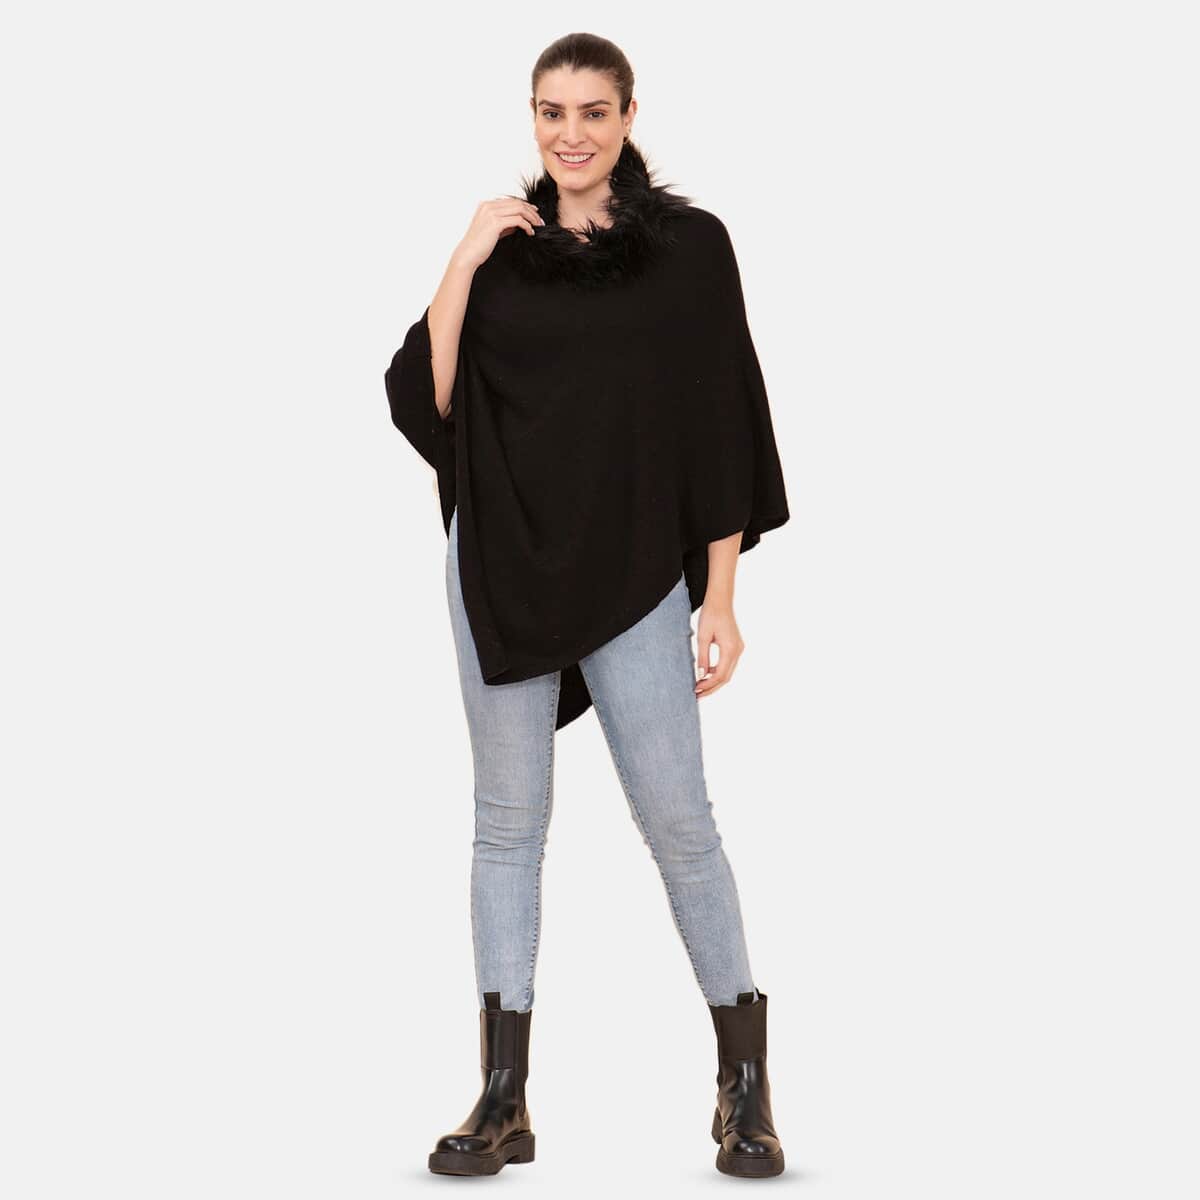 LA MAREY 100% Pashmina Cashmere Wool Black Designer Poncho for Women with Faux Fur Trim - One Size Fits Most , Cashmere Poncho , Women Capes , Poncho Scarf image number 0